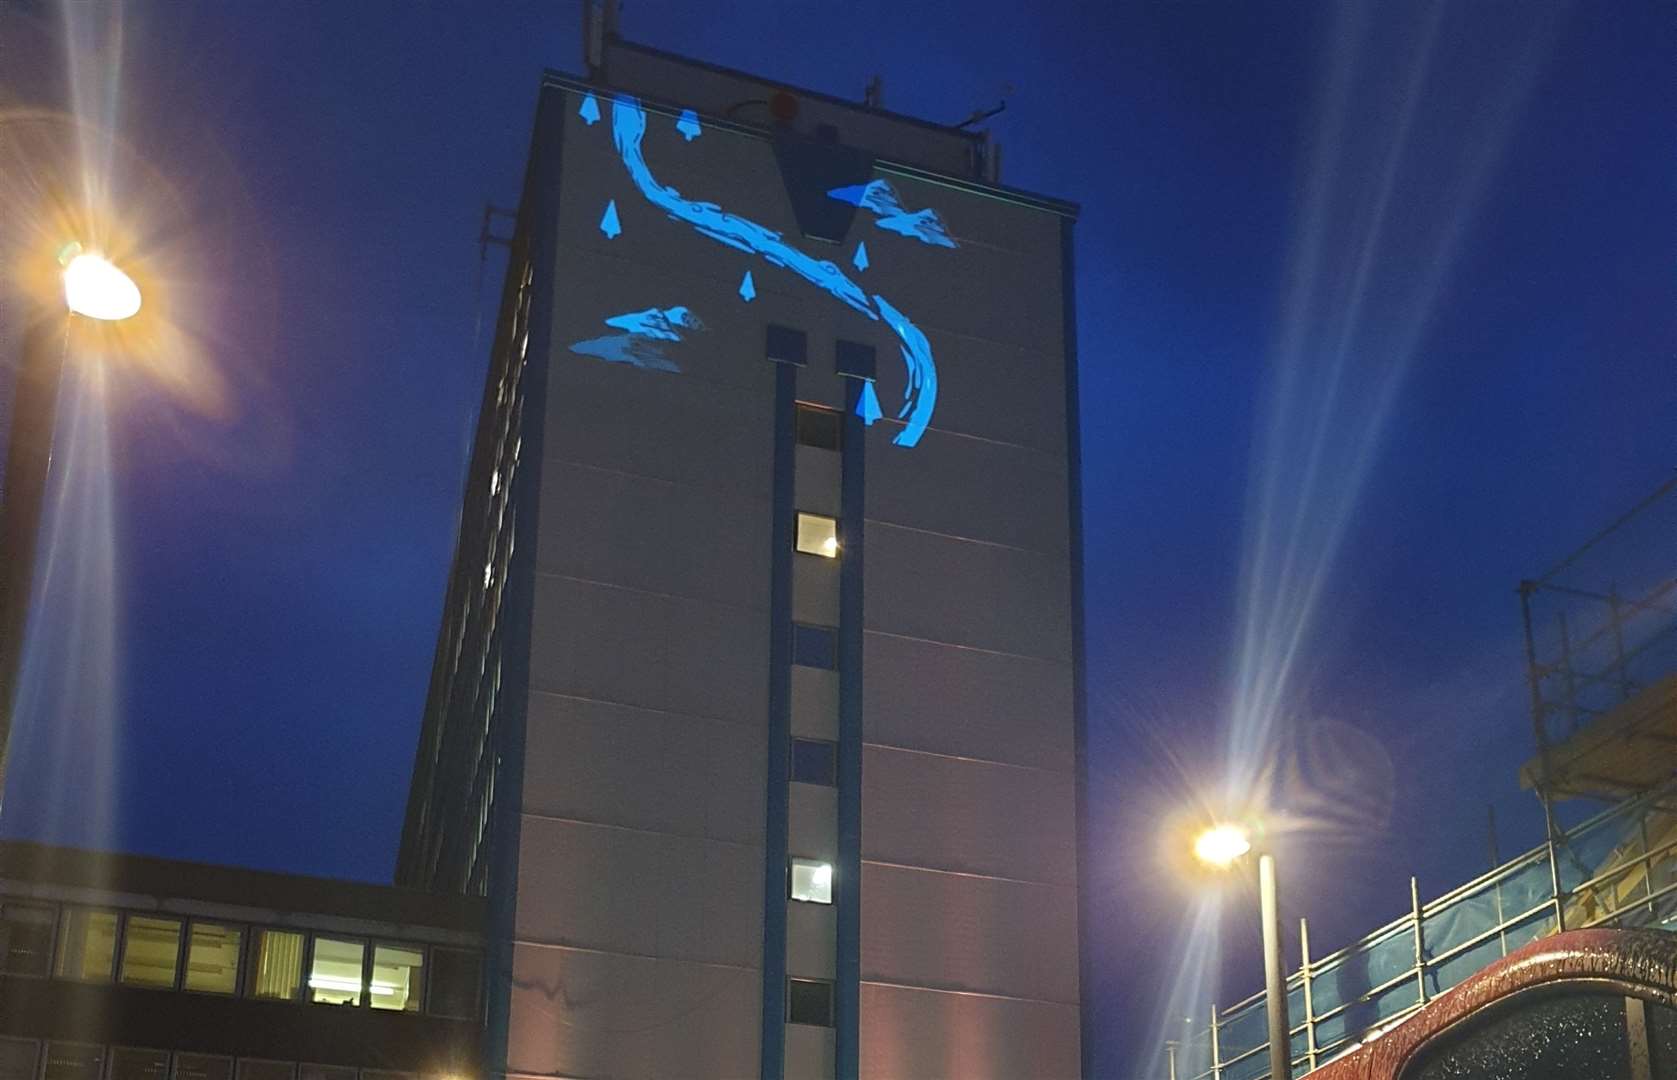 Enjoy a five minute digital mapping projection on the side of International House, Dover Place, celebrating Ashford’s heritage and history.